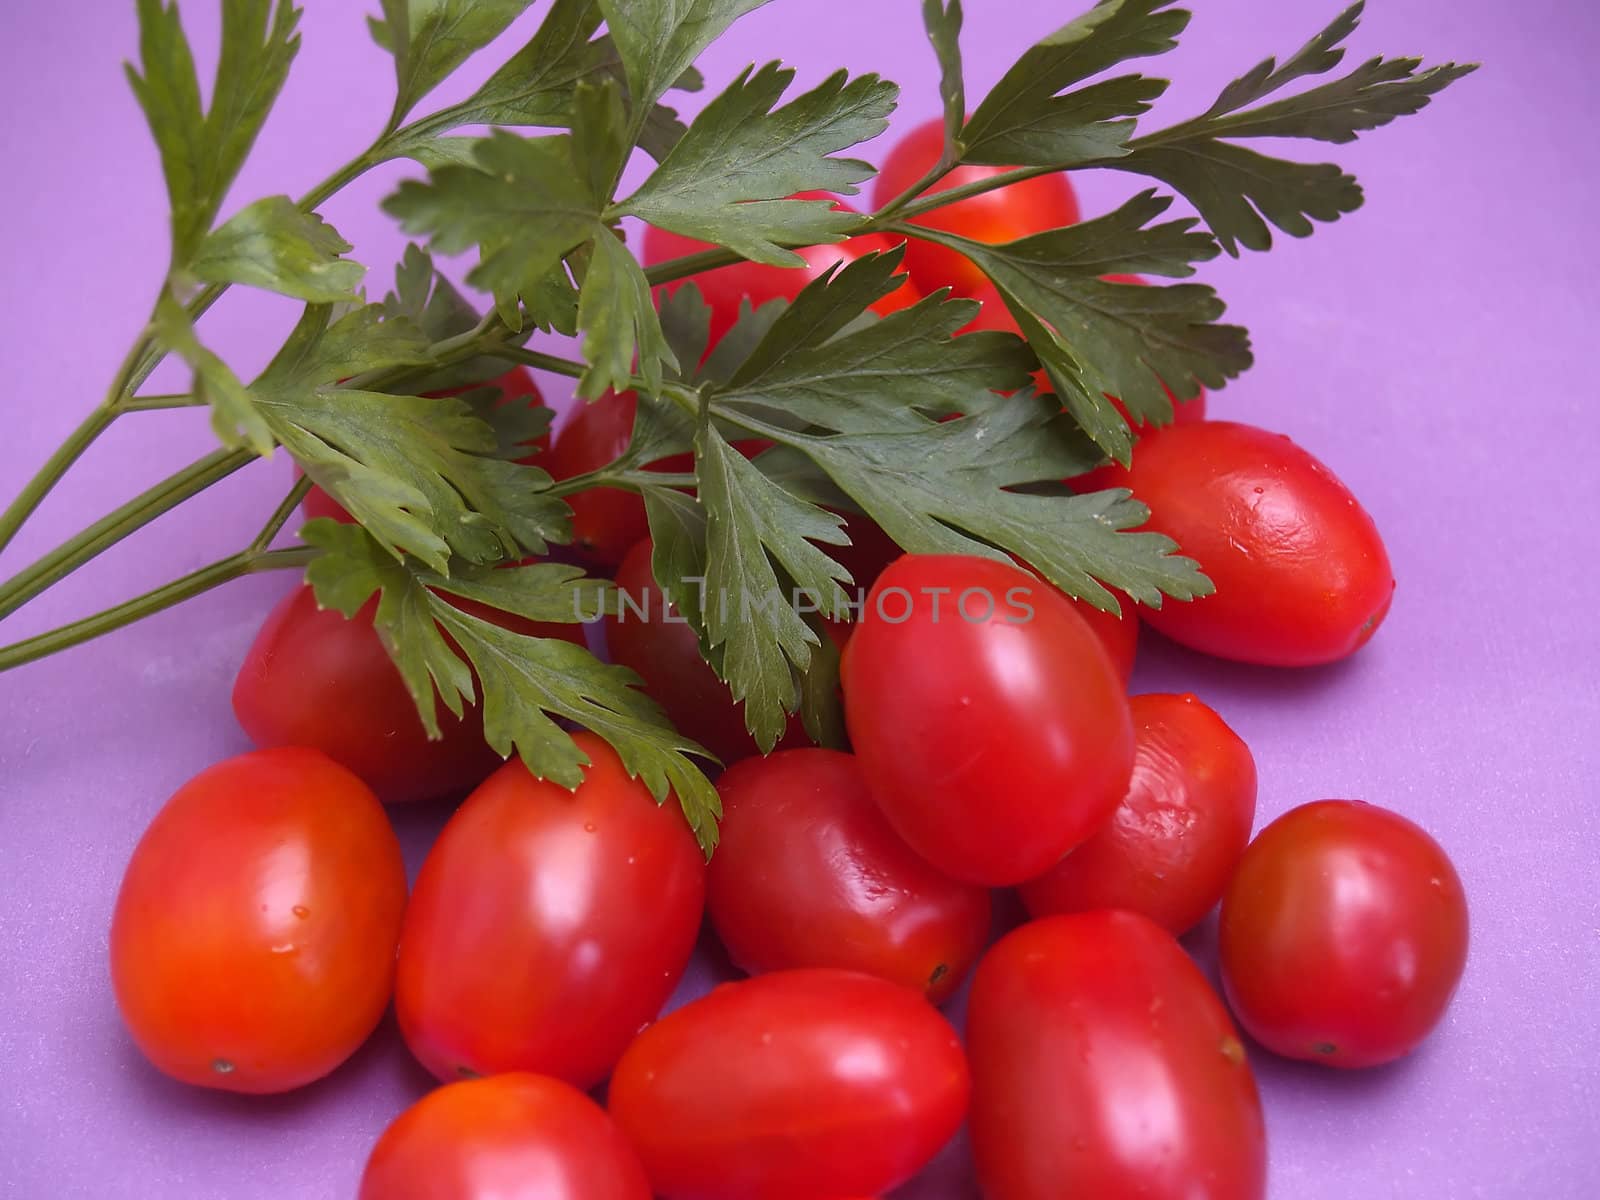  cherry tomatoes and parsley